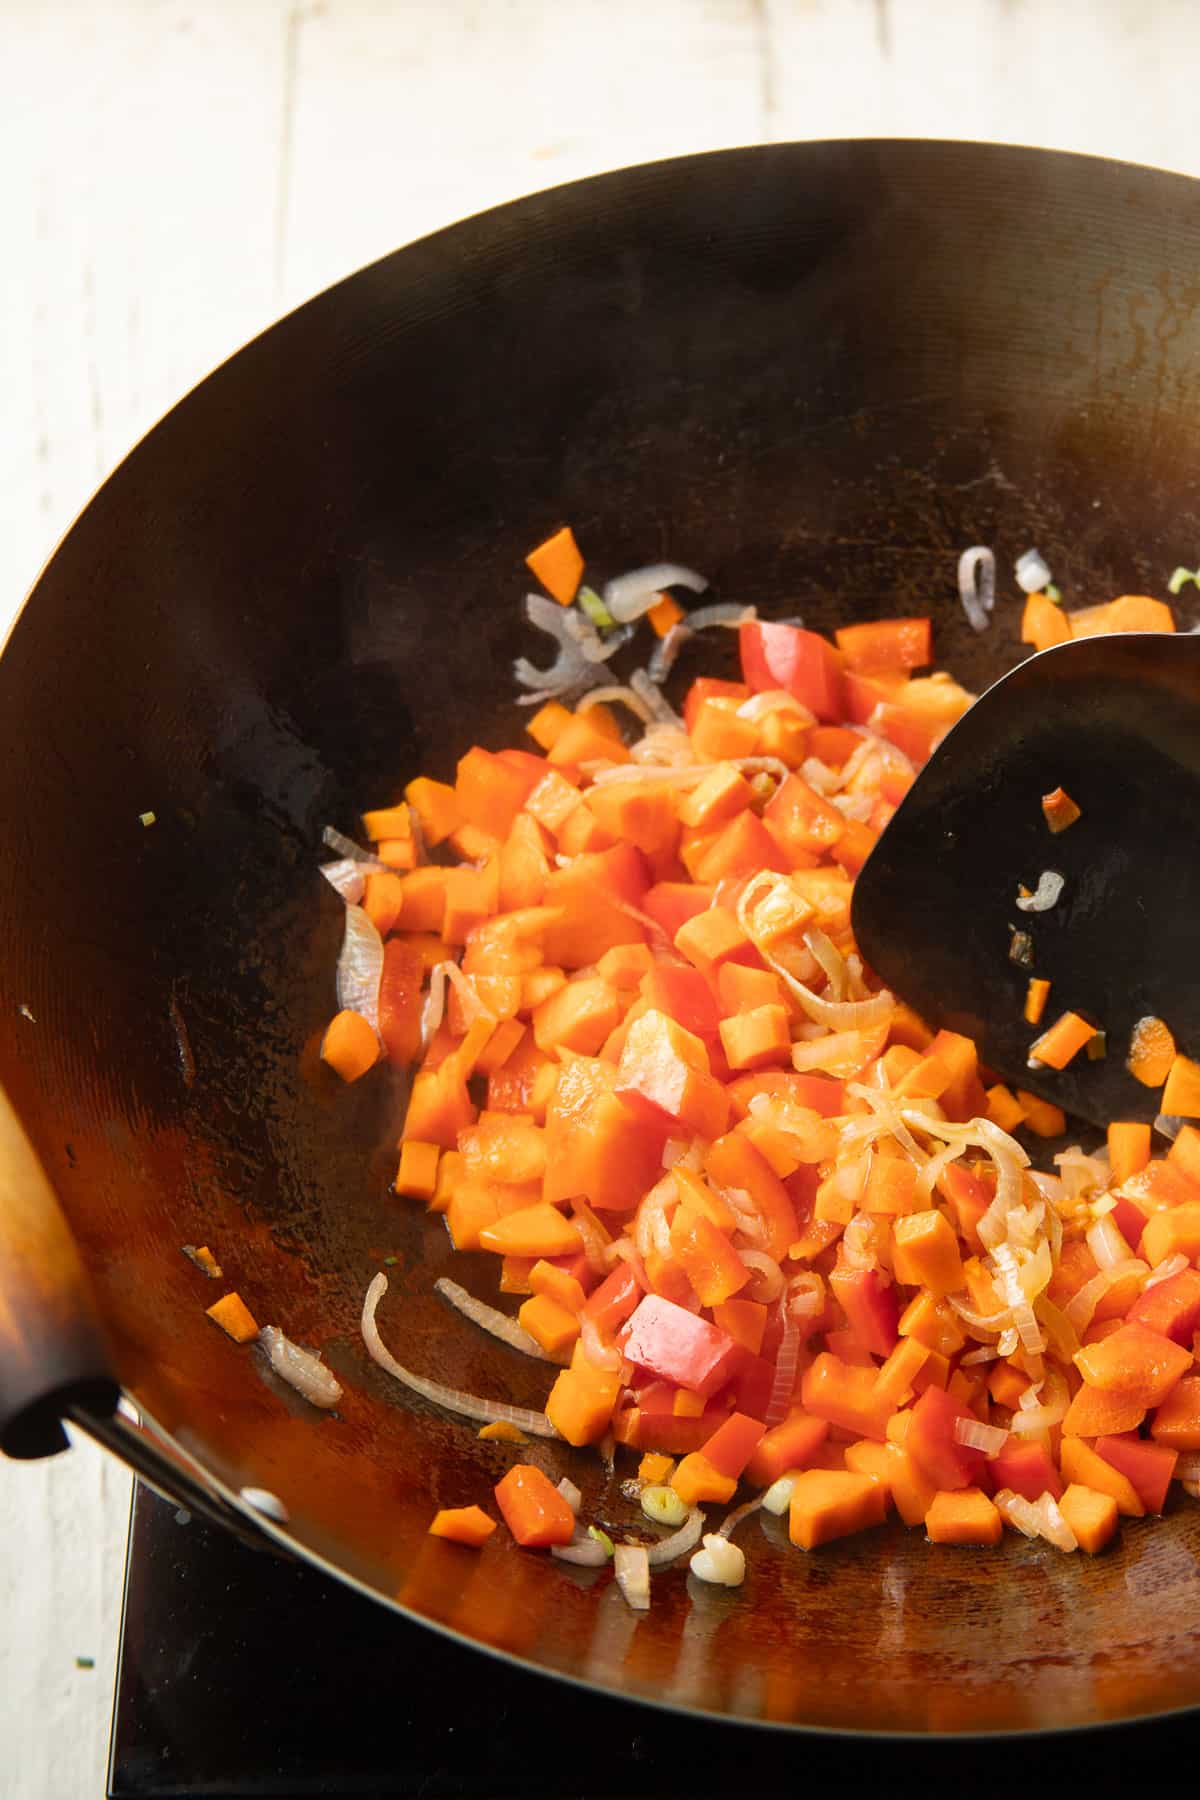 Carrots, bell pepper, and shallots being stir-fried in a wok.